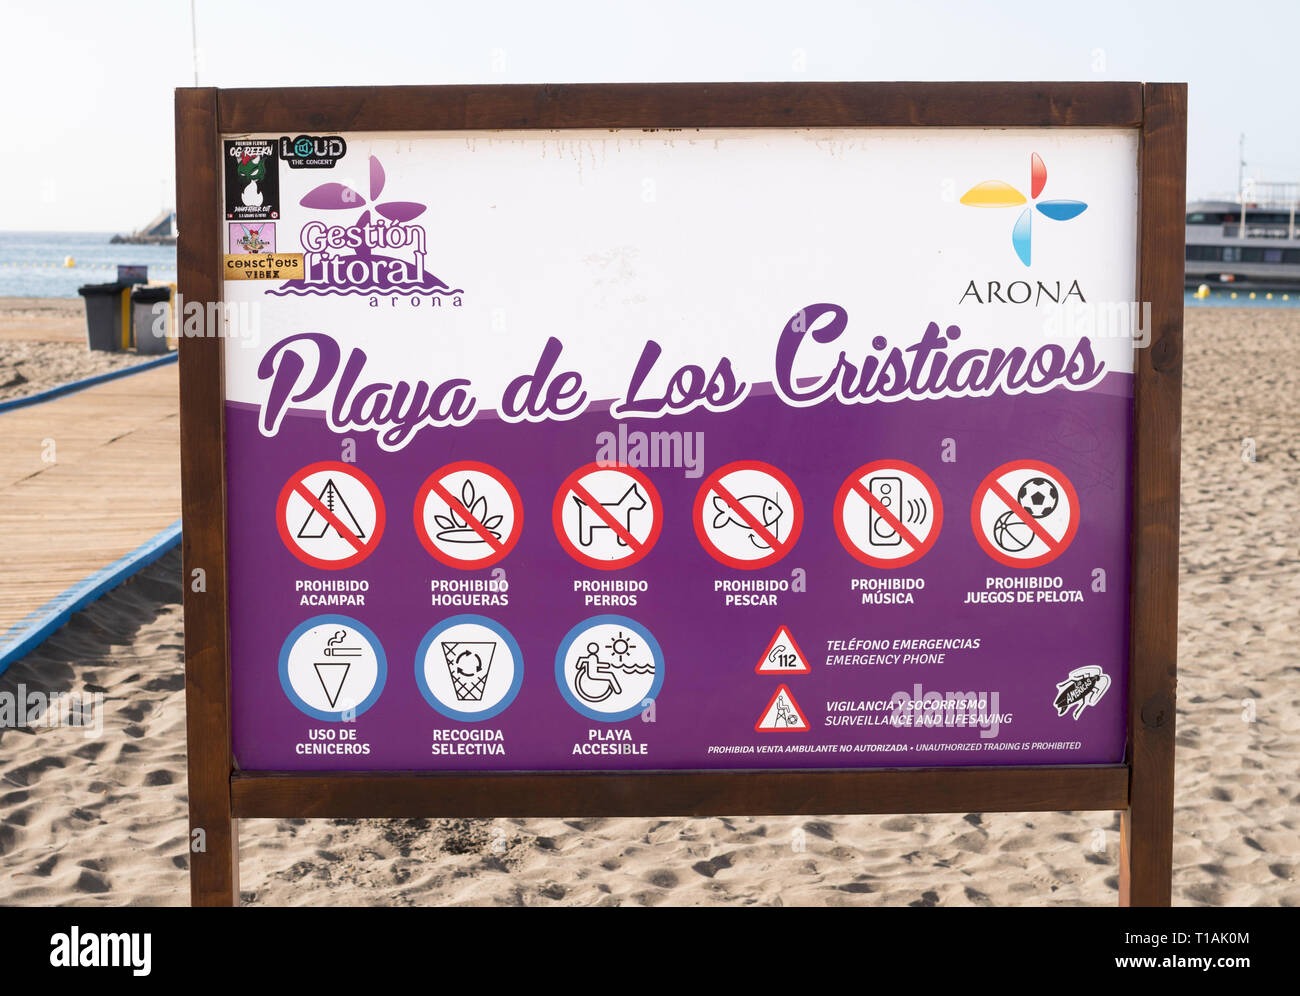 Notice showing list of prohibited activities on the Playa de Los Cristianos, Arona, Tenerife, Canary Islands Stock Photo